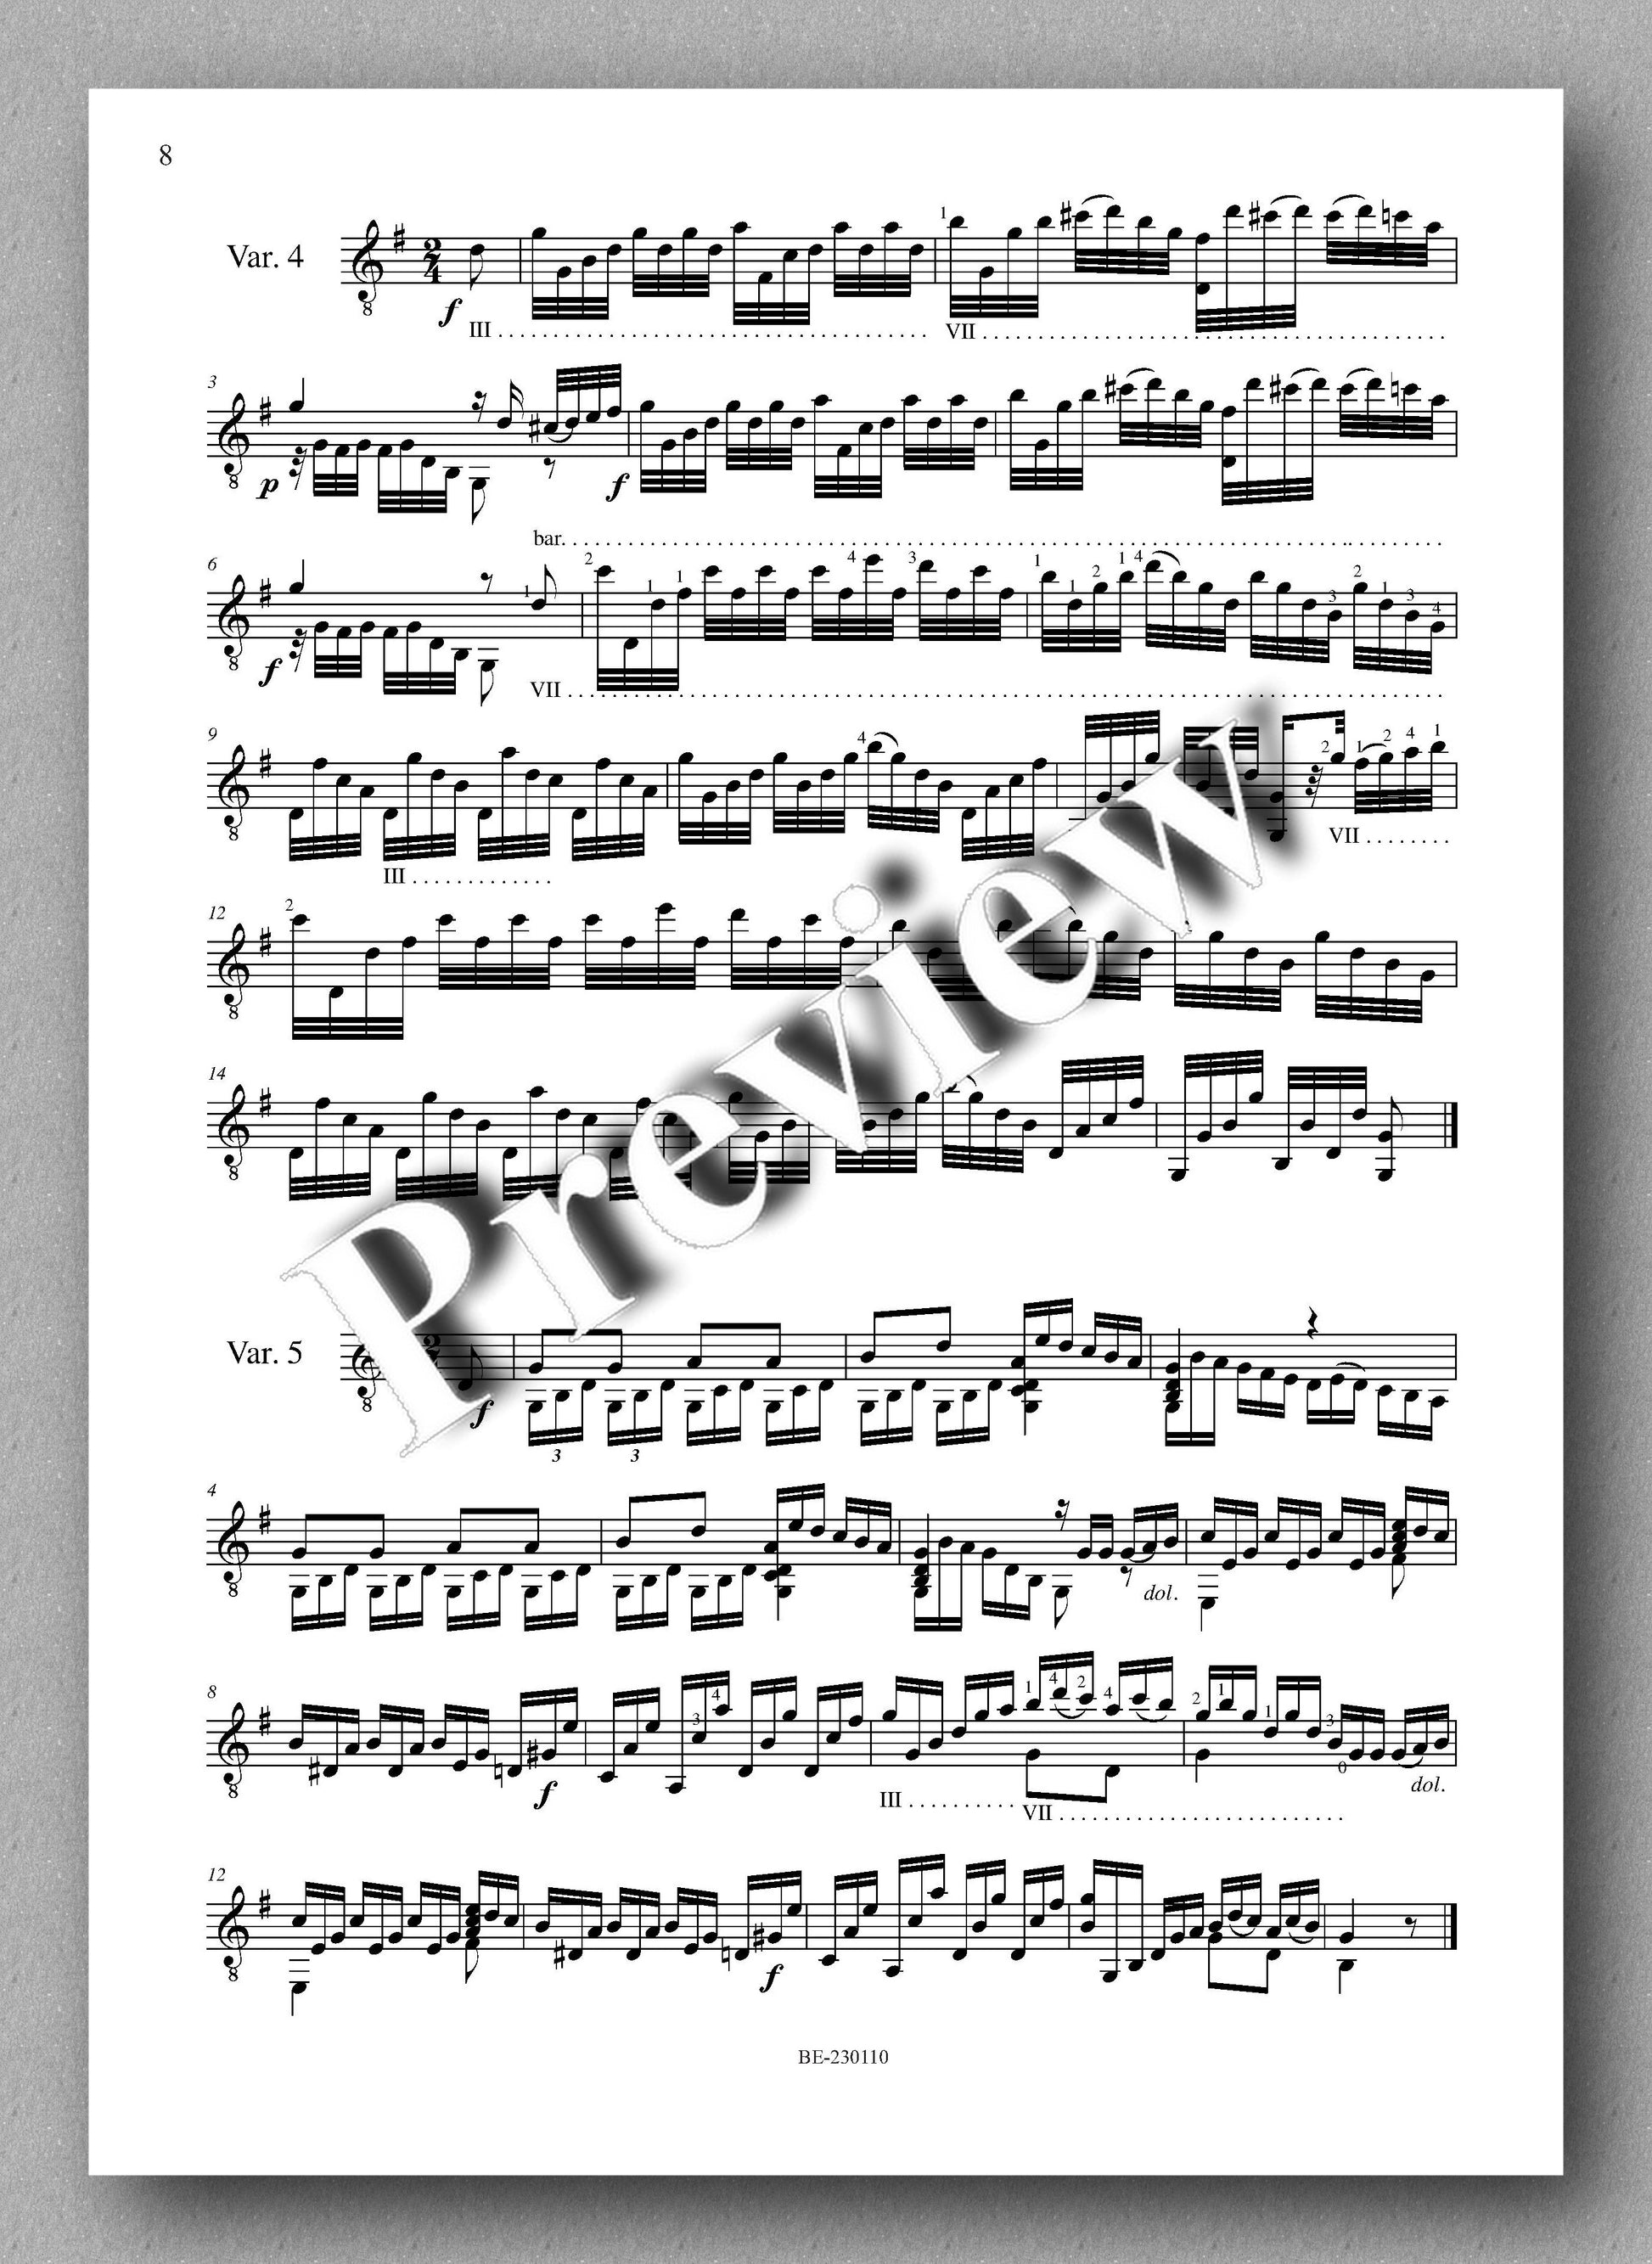 Molino, Collected Works for Guitar Solo, Vol. 22 - preview of the music score 2